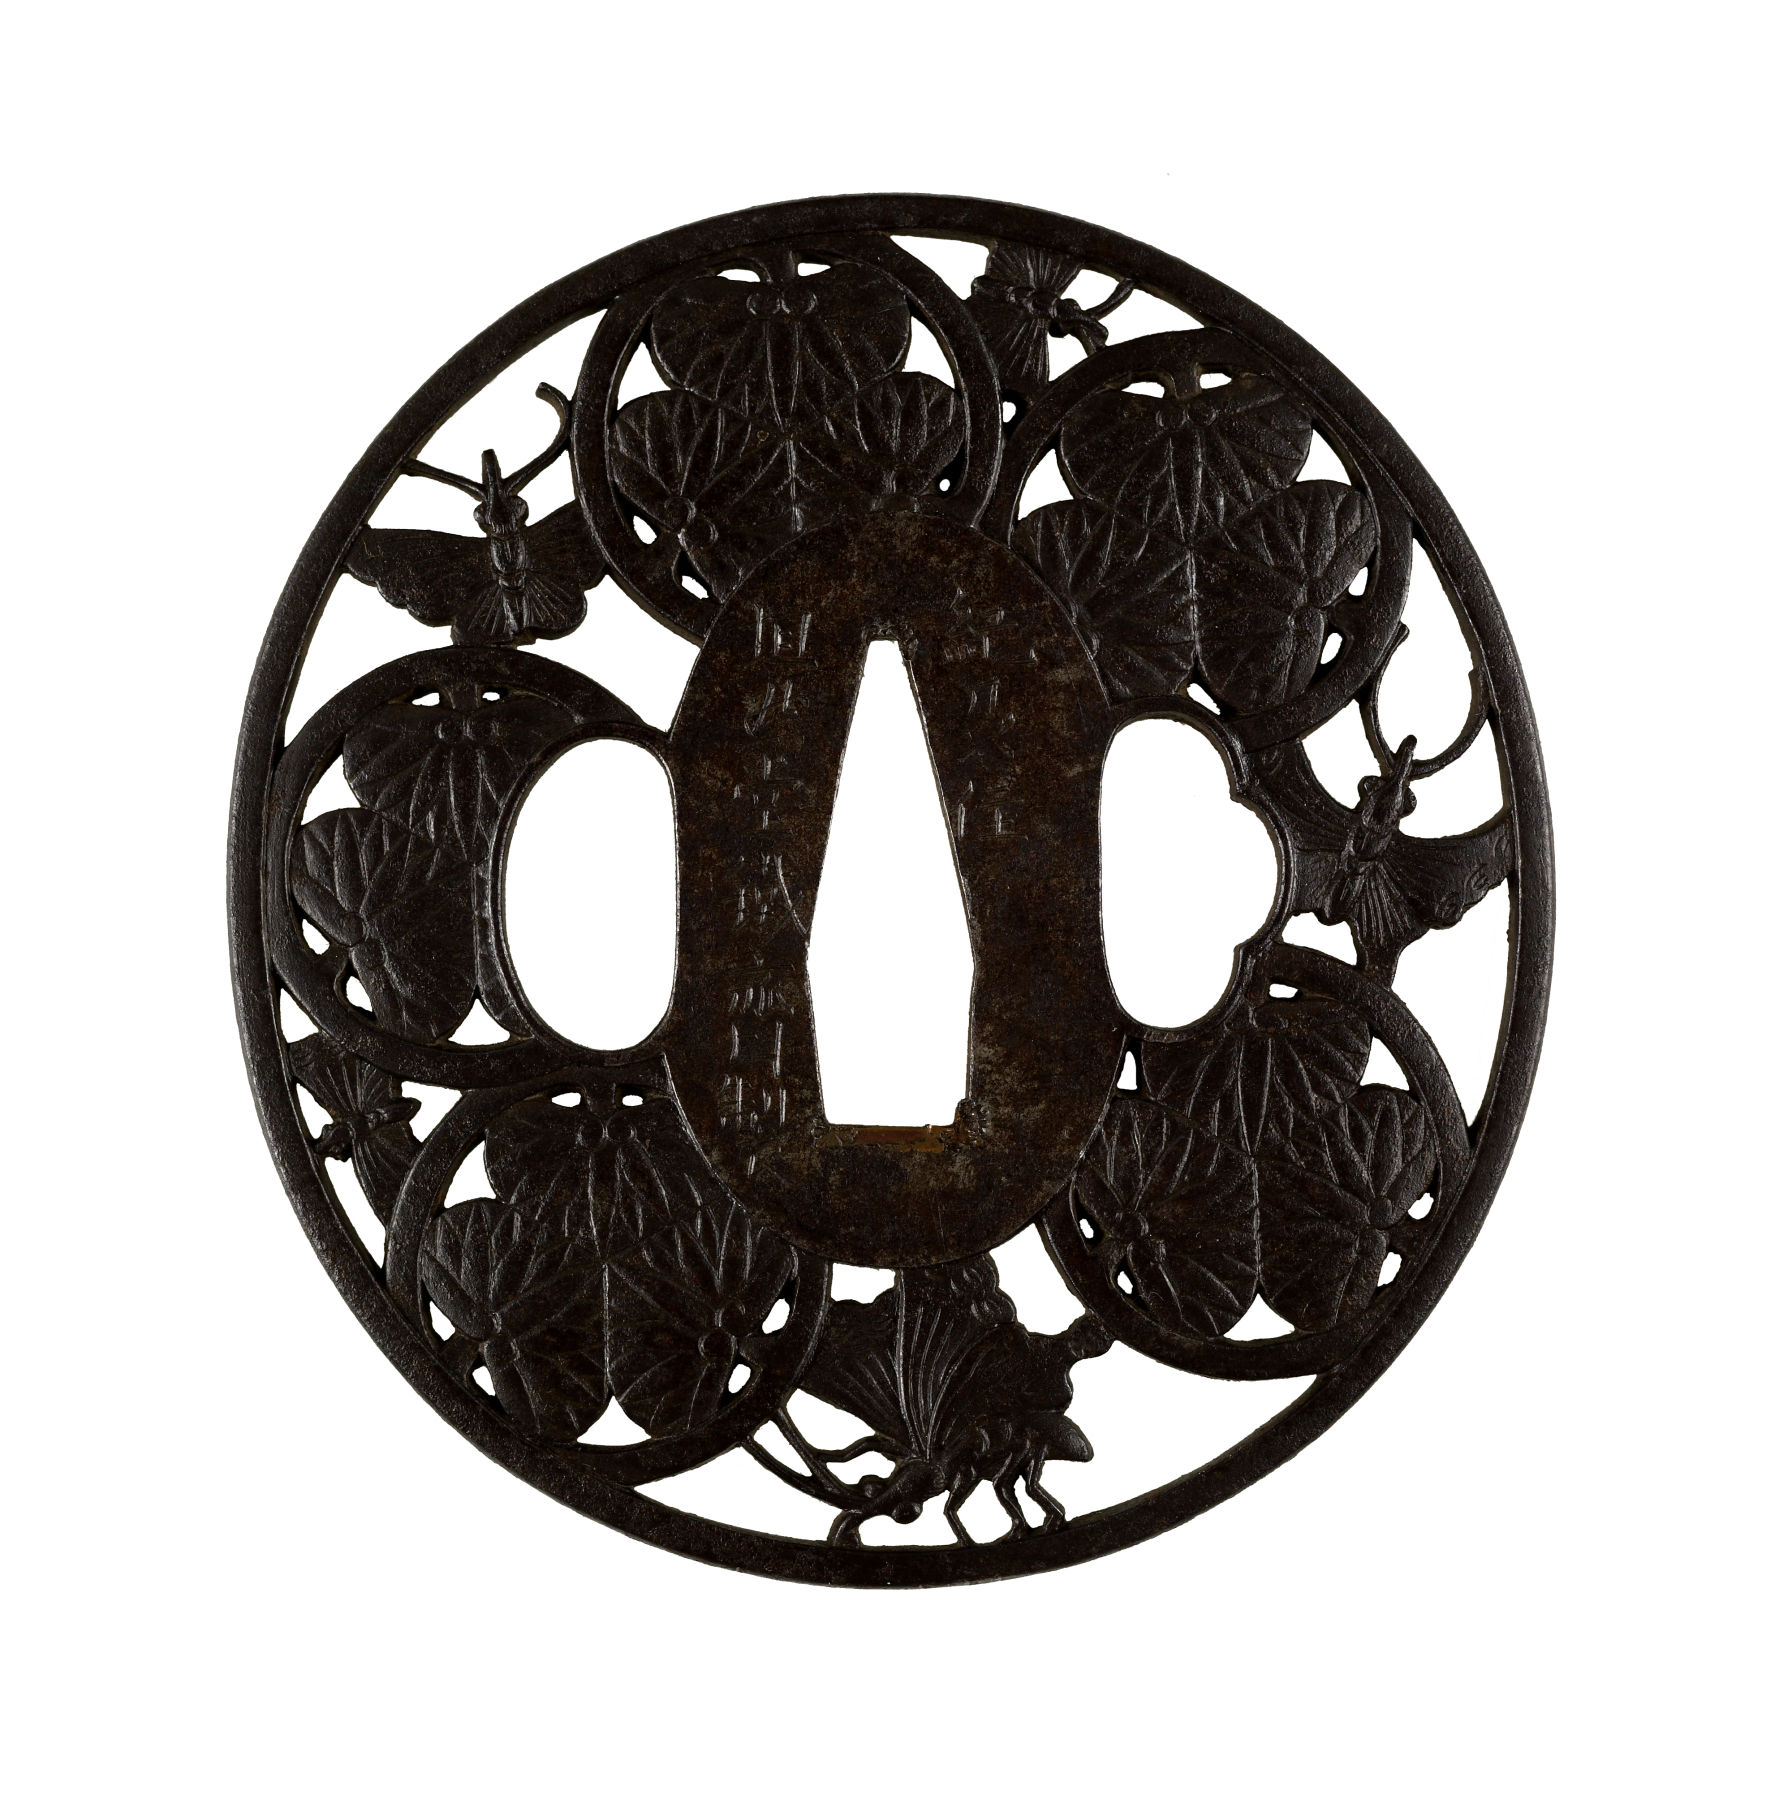 Image for Tsuba with Hollyhock Crests ("Aoi mon")